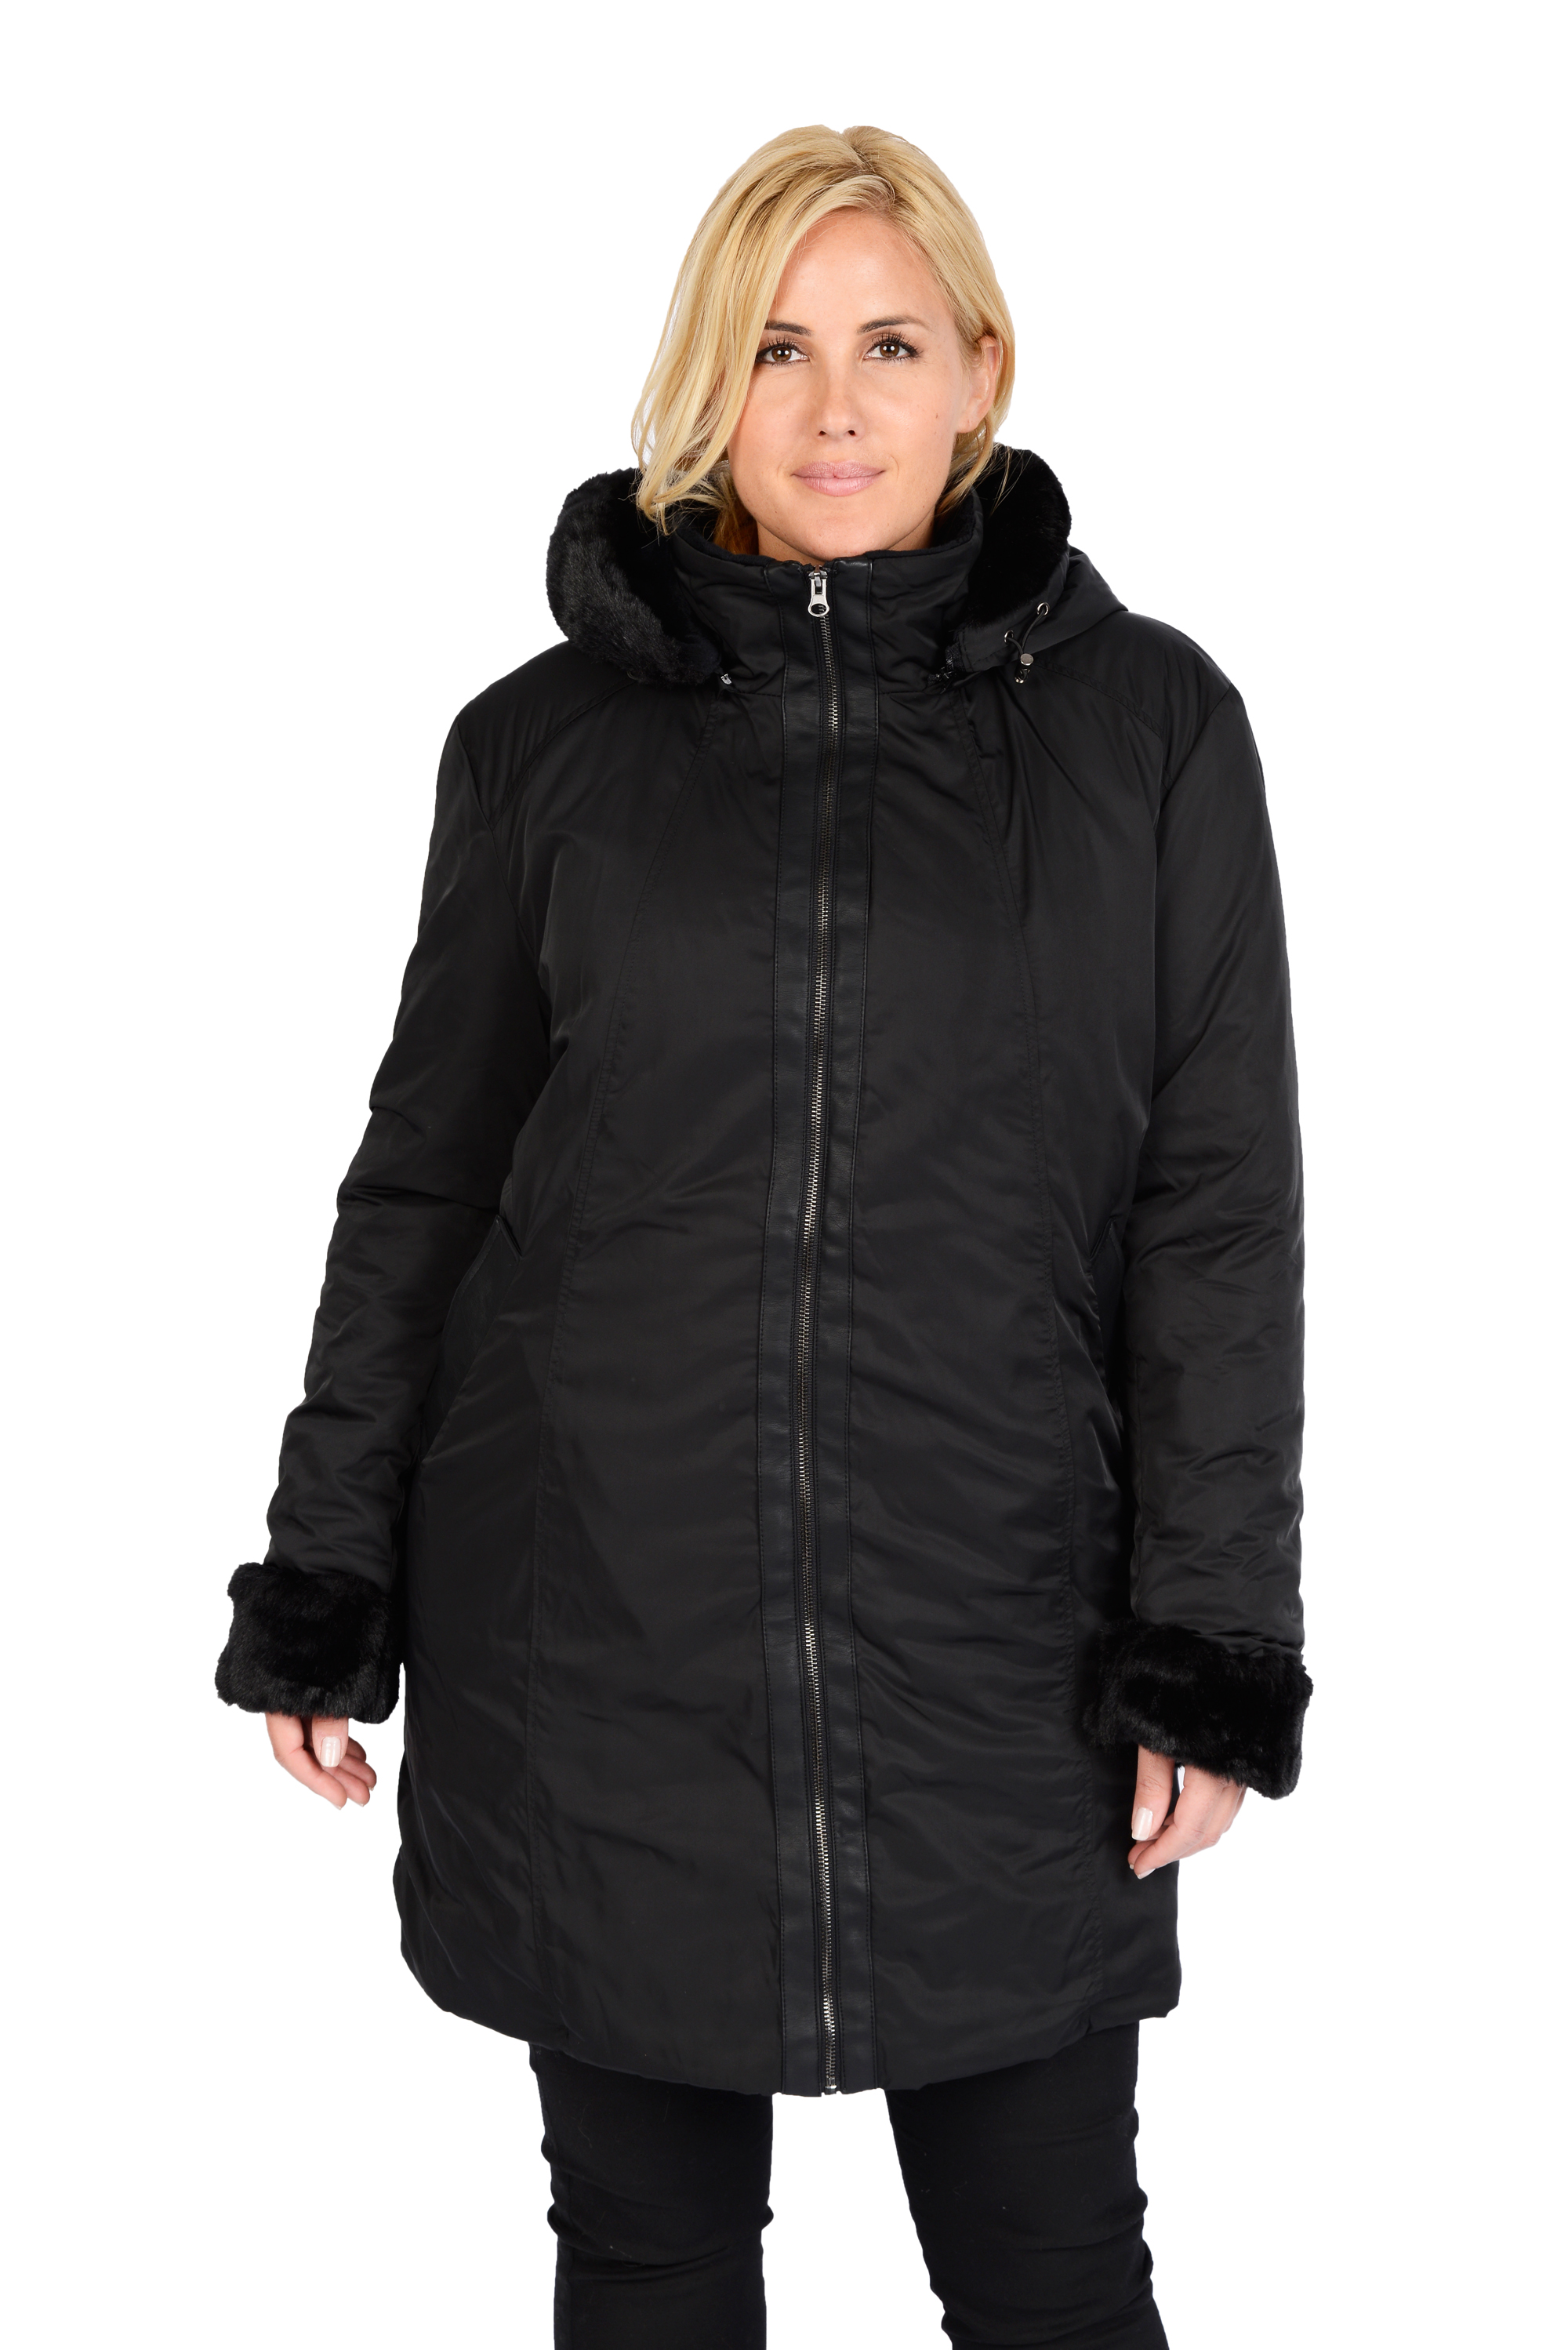 UPC 805099000241 product image for Women's Plus Polyester Activewear with Faux Fur Trim Hood and Cuffs | upcitemdb.com